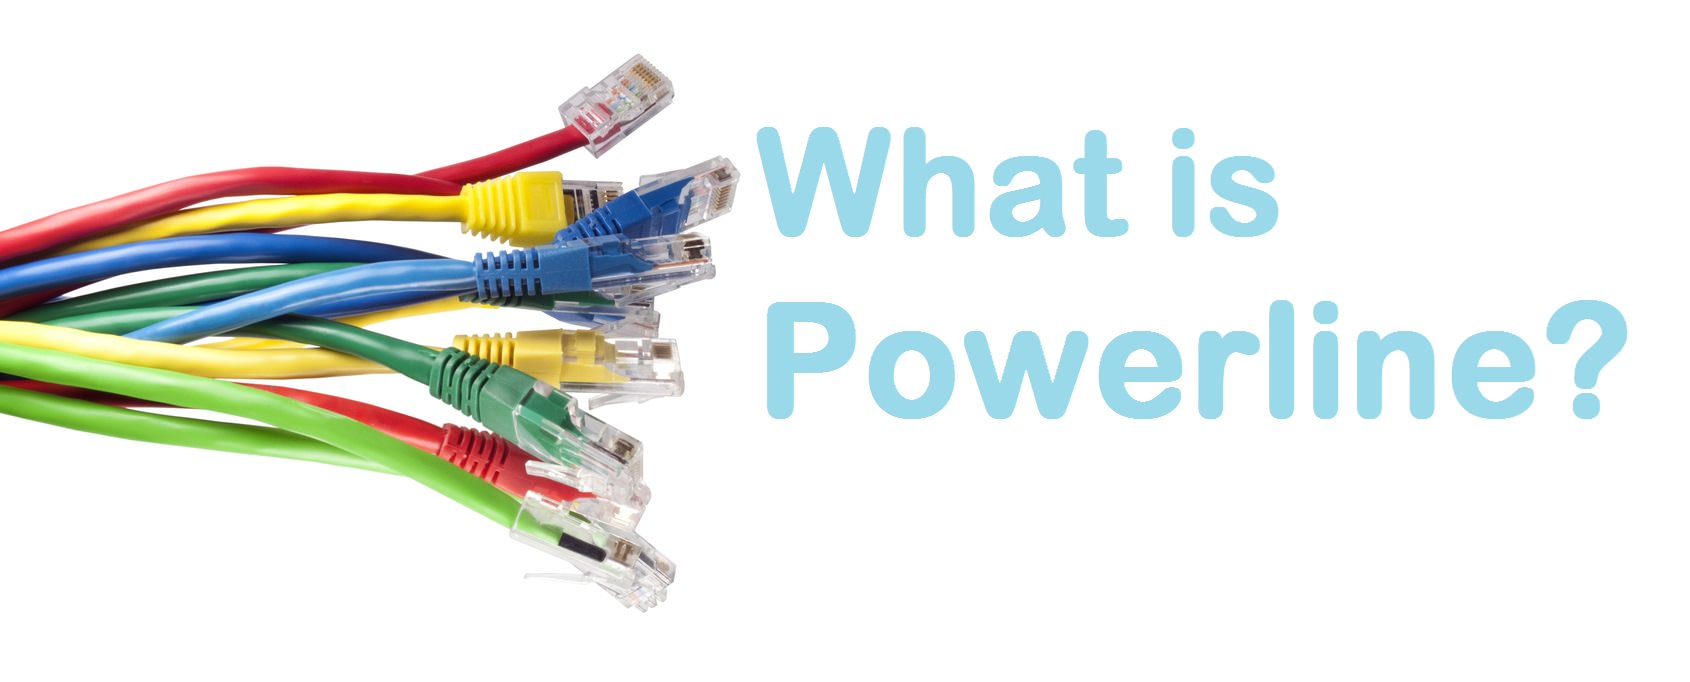 What is powerline